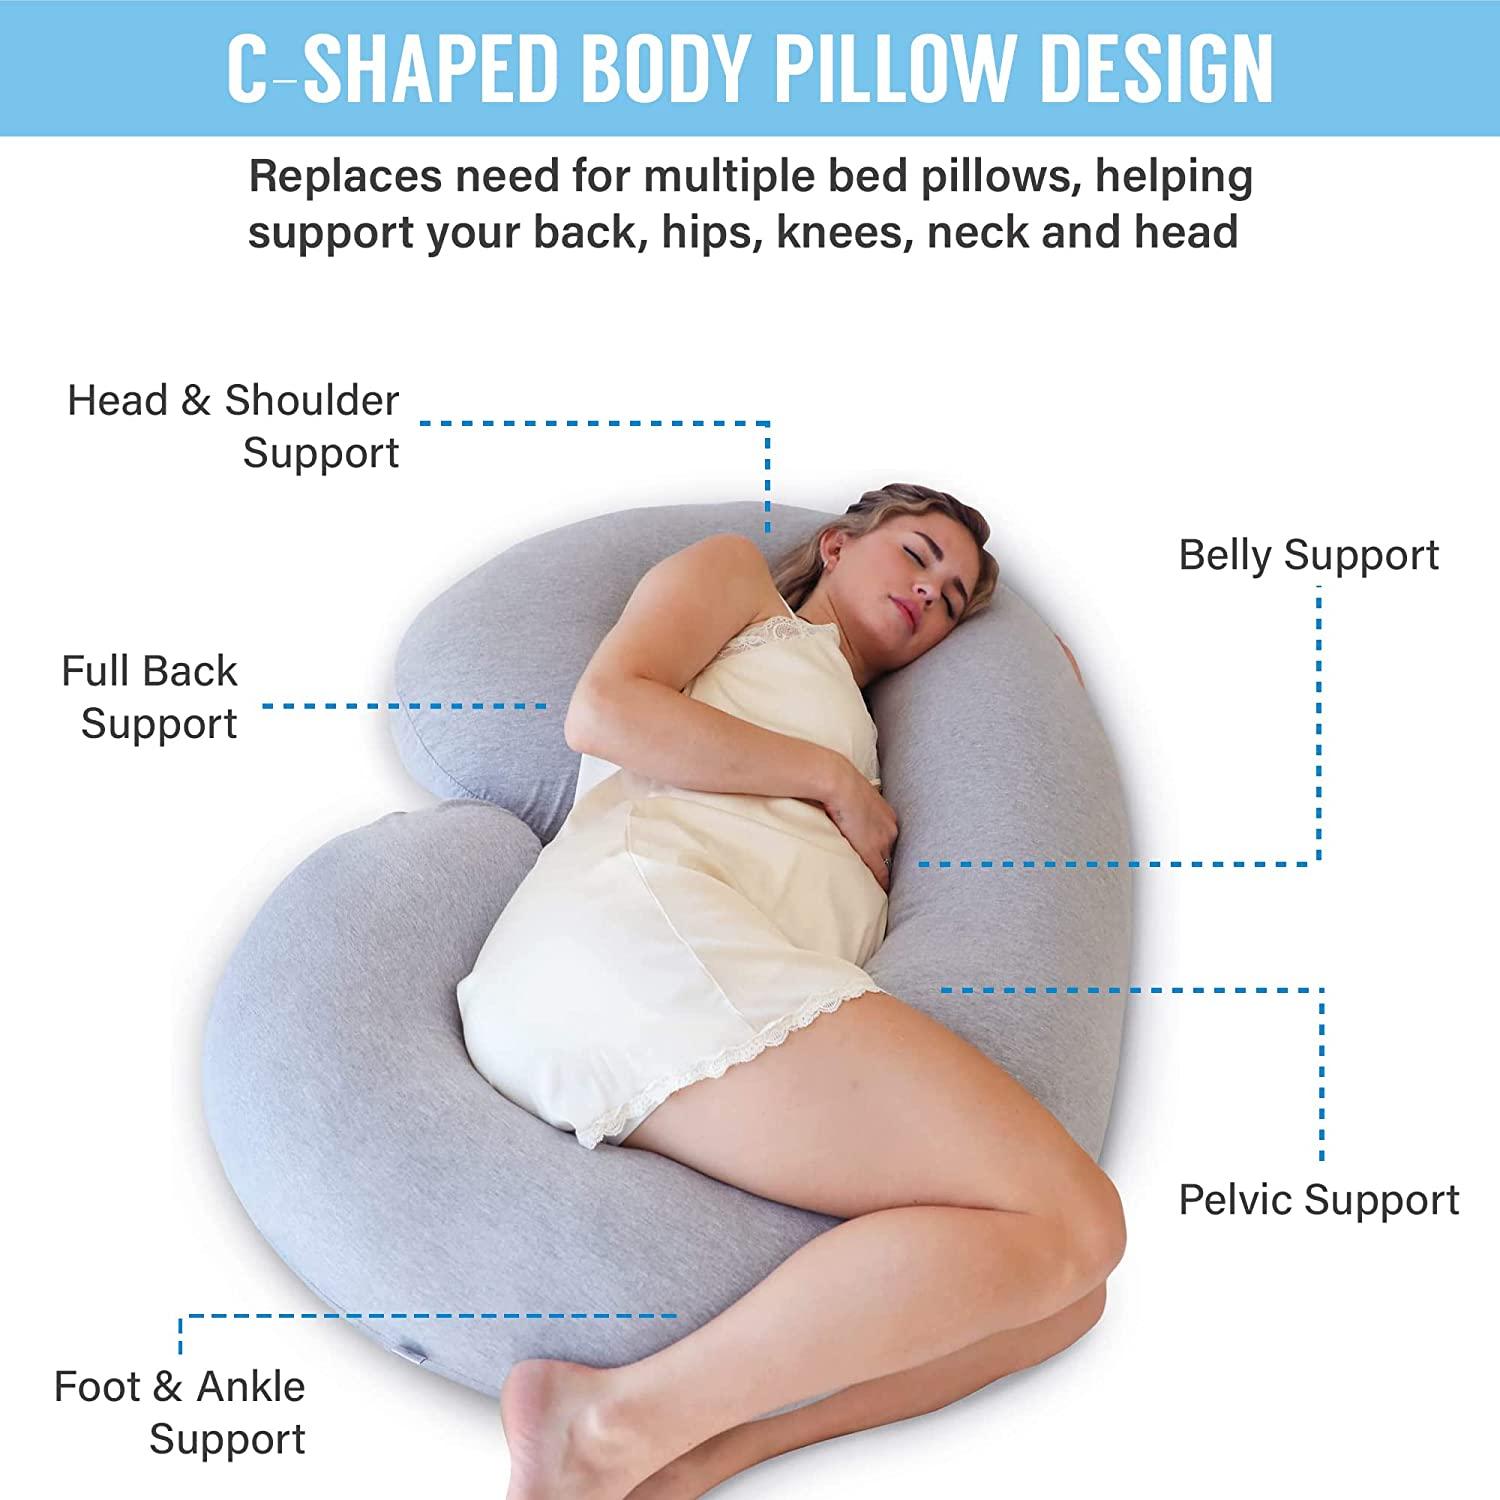 Pregnancy Pillows for Sleeping, Maternity, Pregnancy Body Pillow Support for Back, Legs, Belly, Hips of Pregnant Women, Detachable and Adjustable with